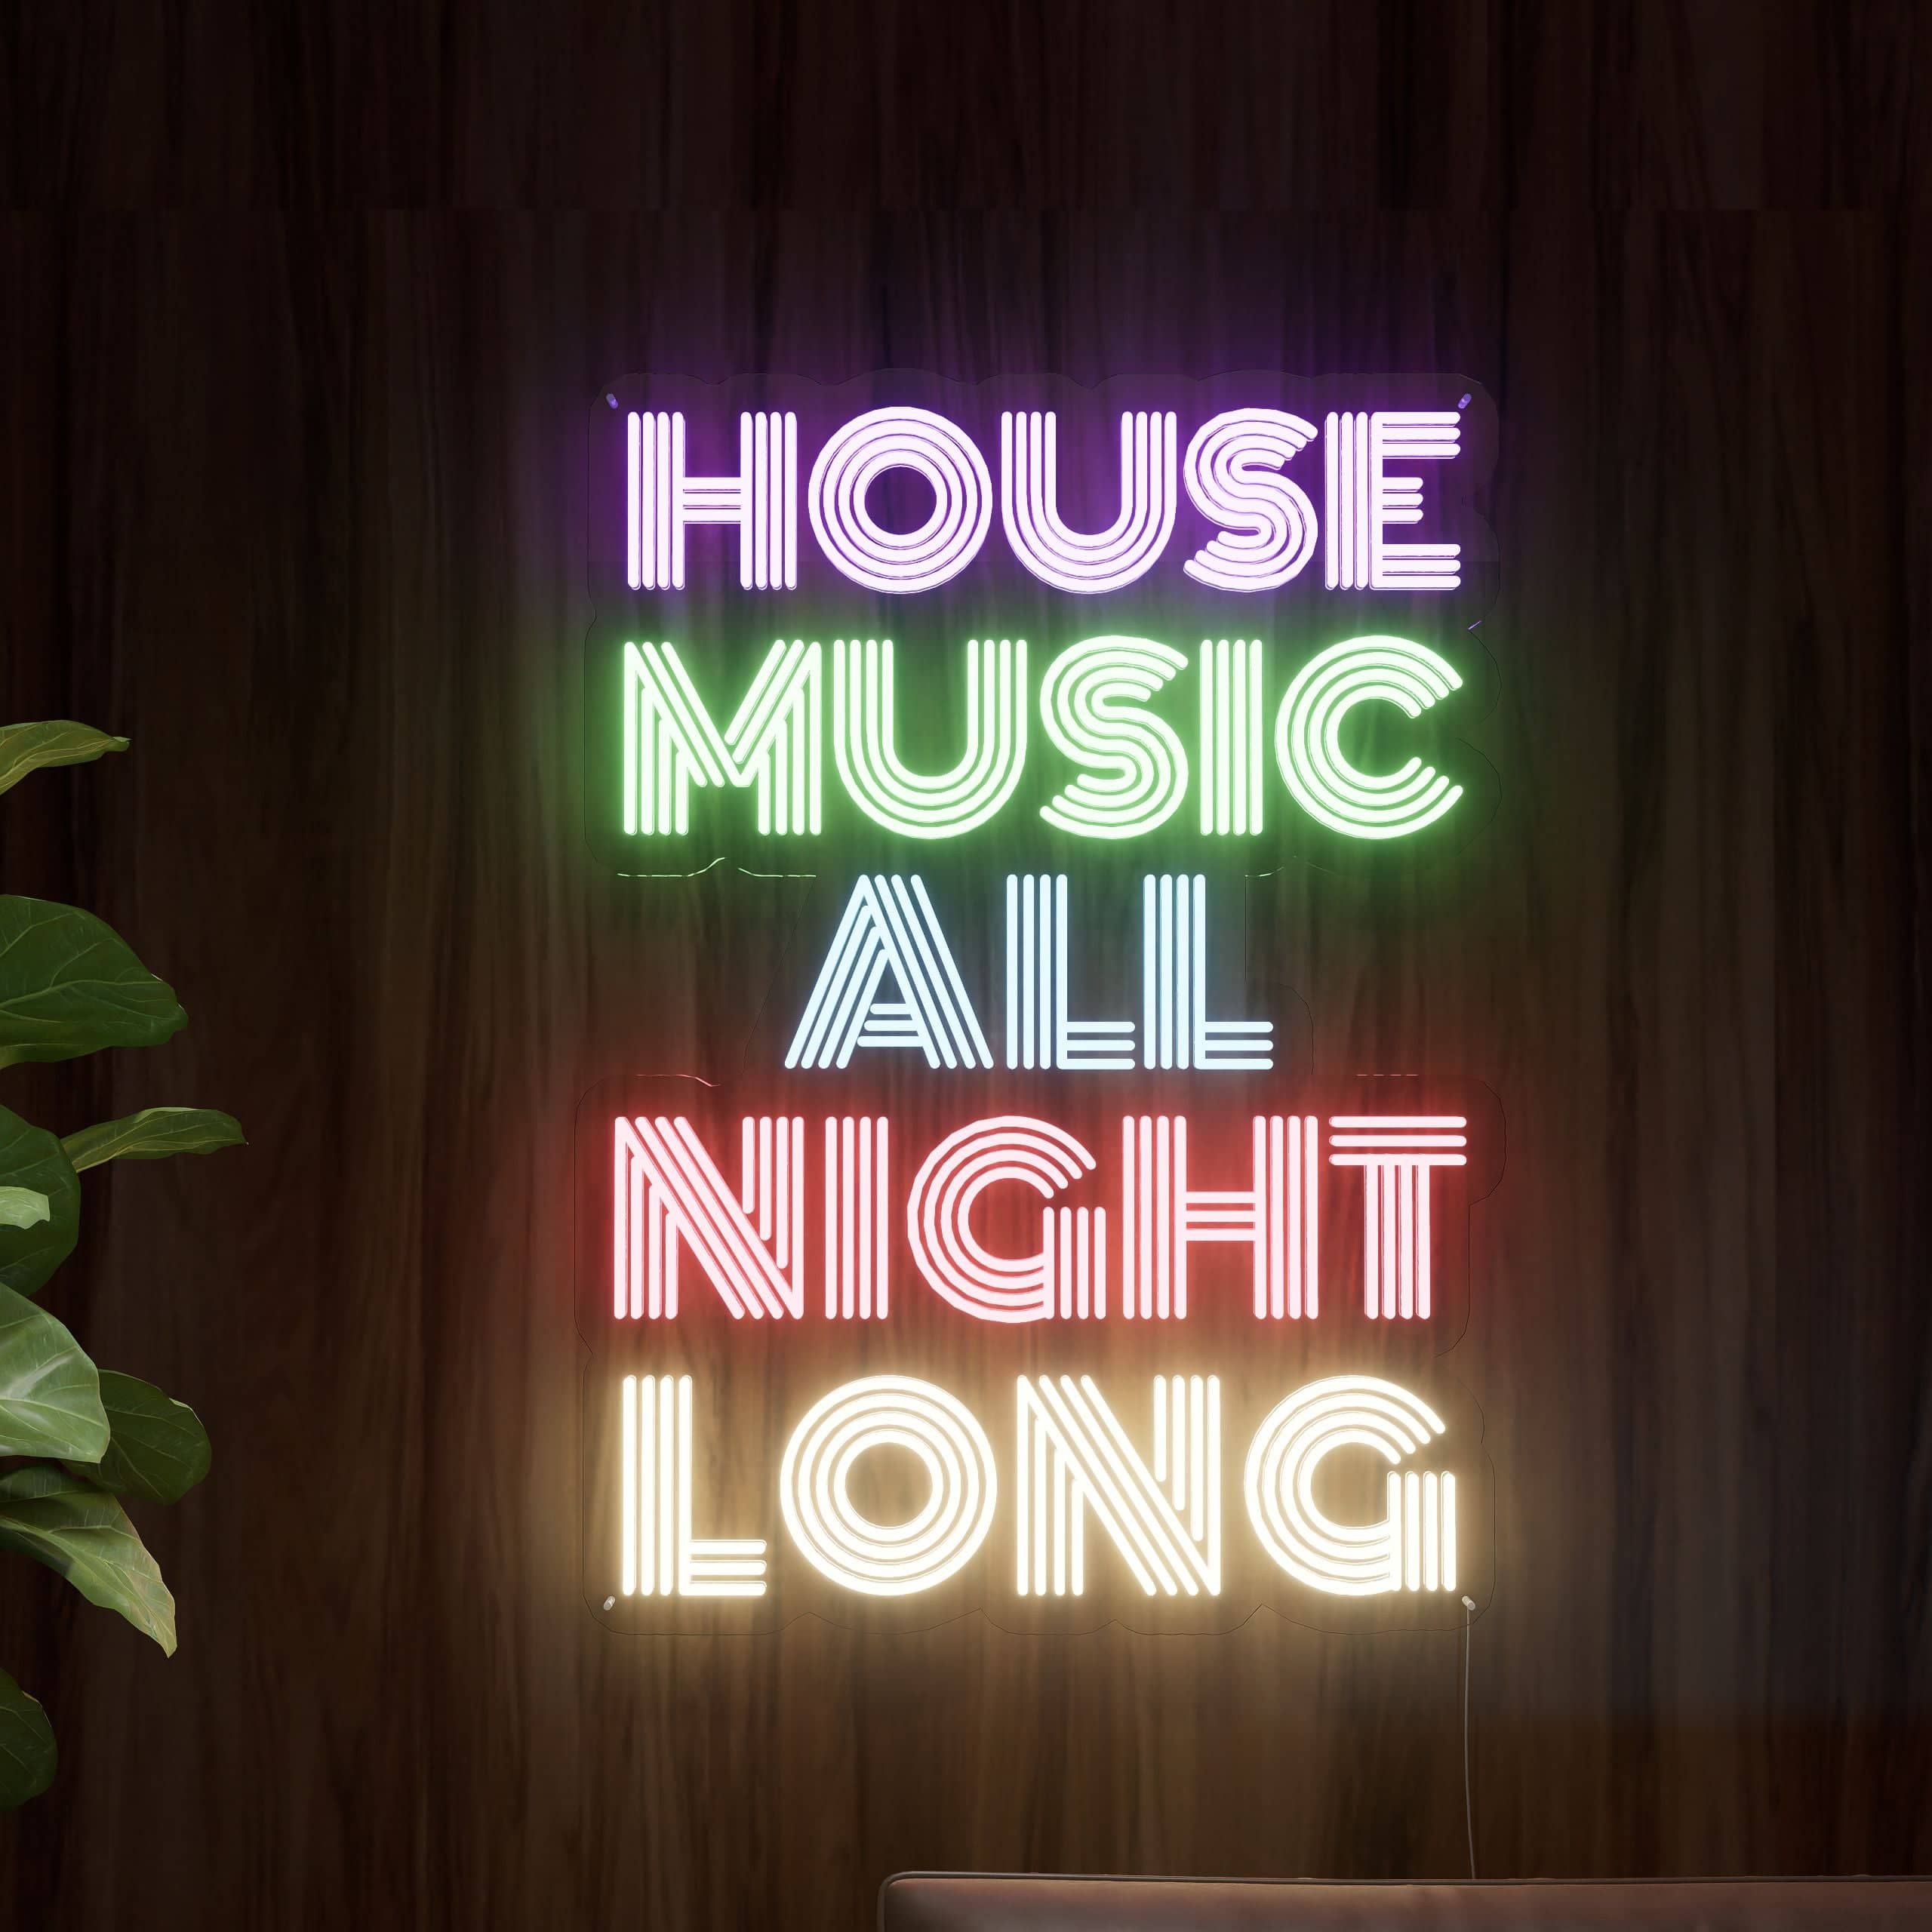 all-night-with-house-music-neon-sign-lite